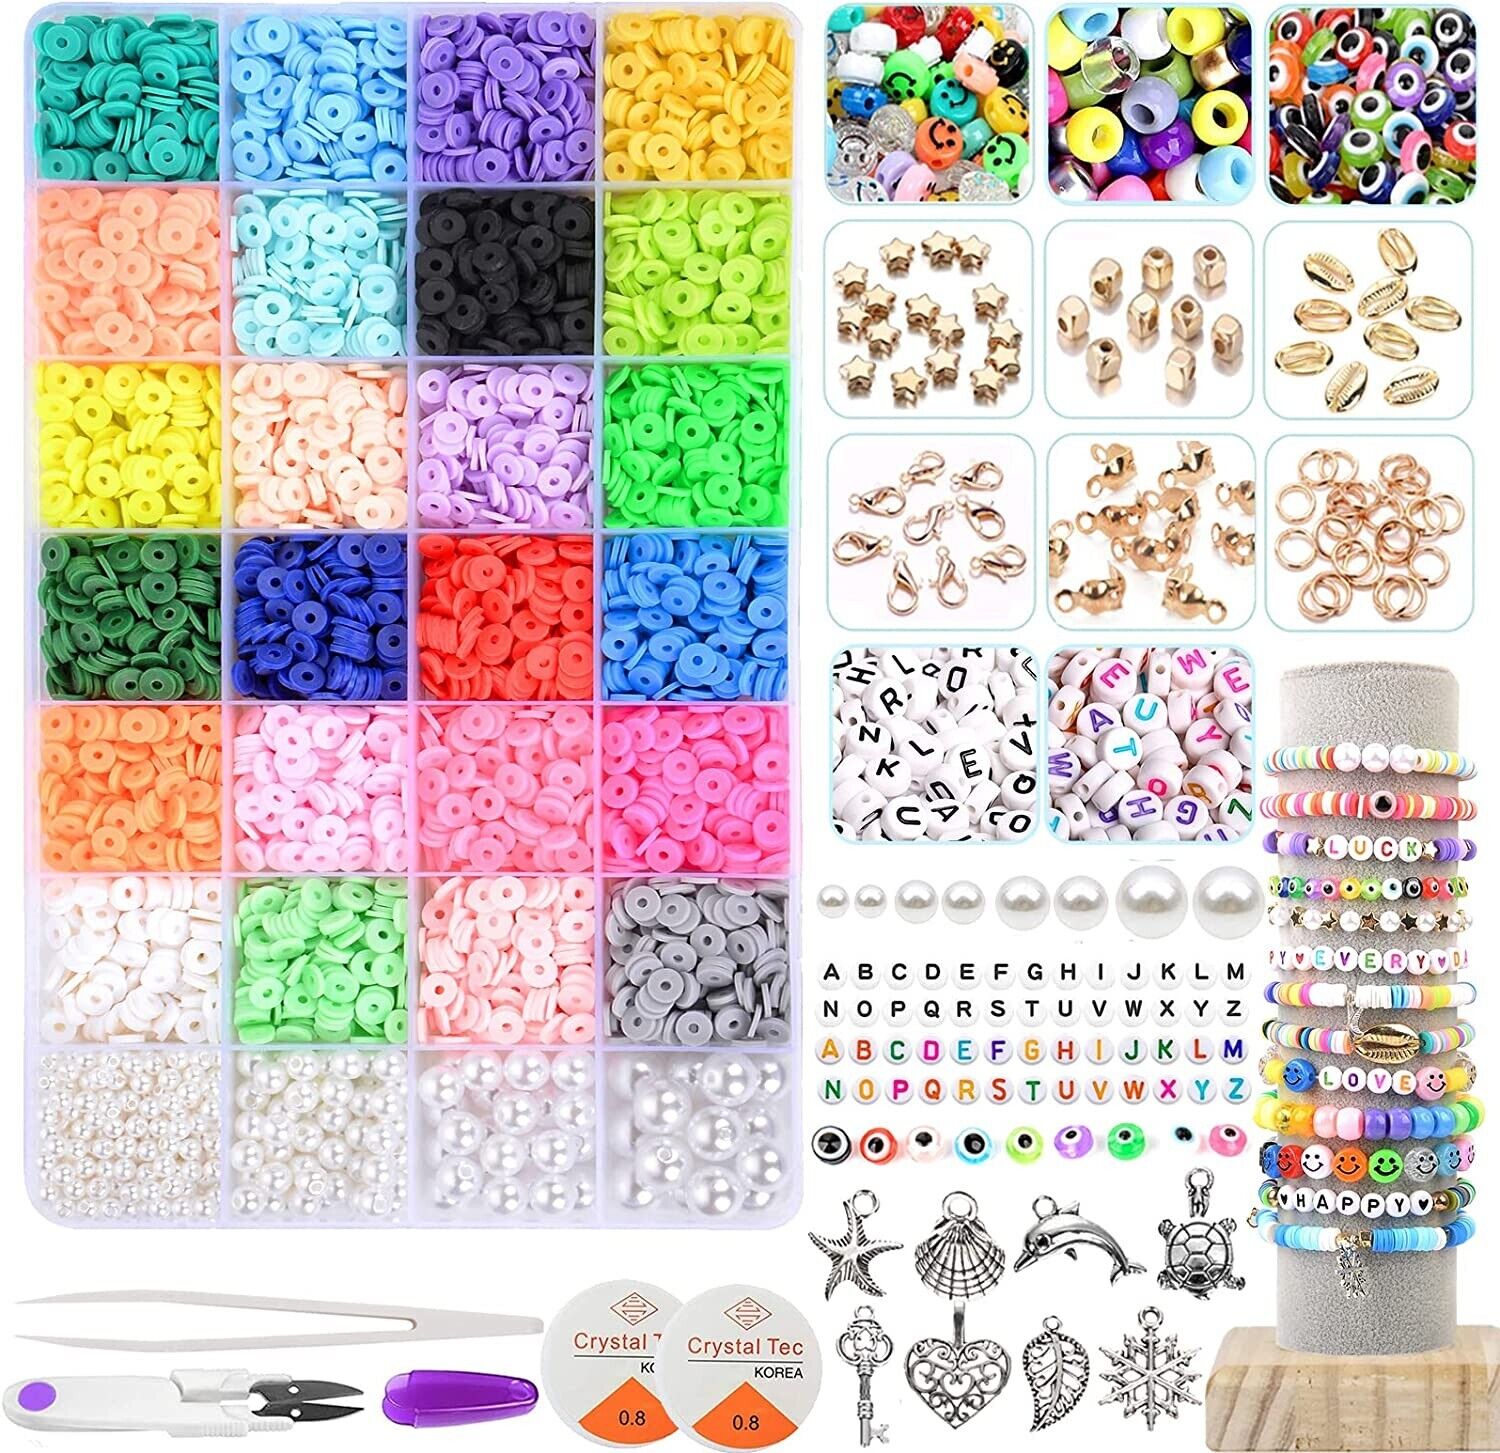 6800 Clay Beads Bracelet Making Kit 24 Colors Spacer Flat Beads for kids Jewelry